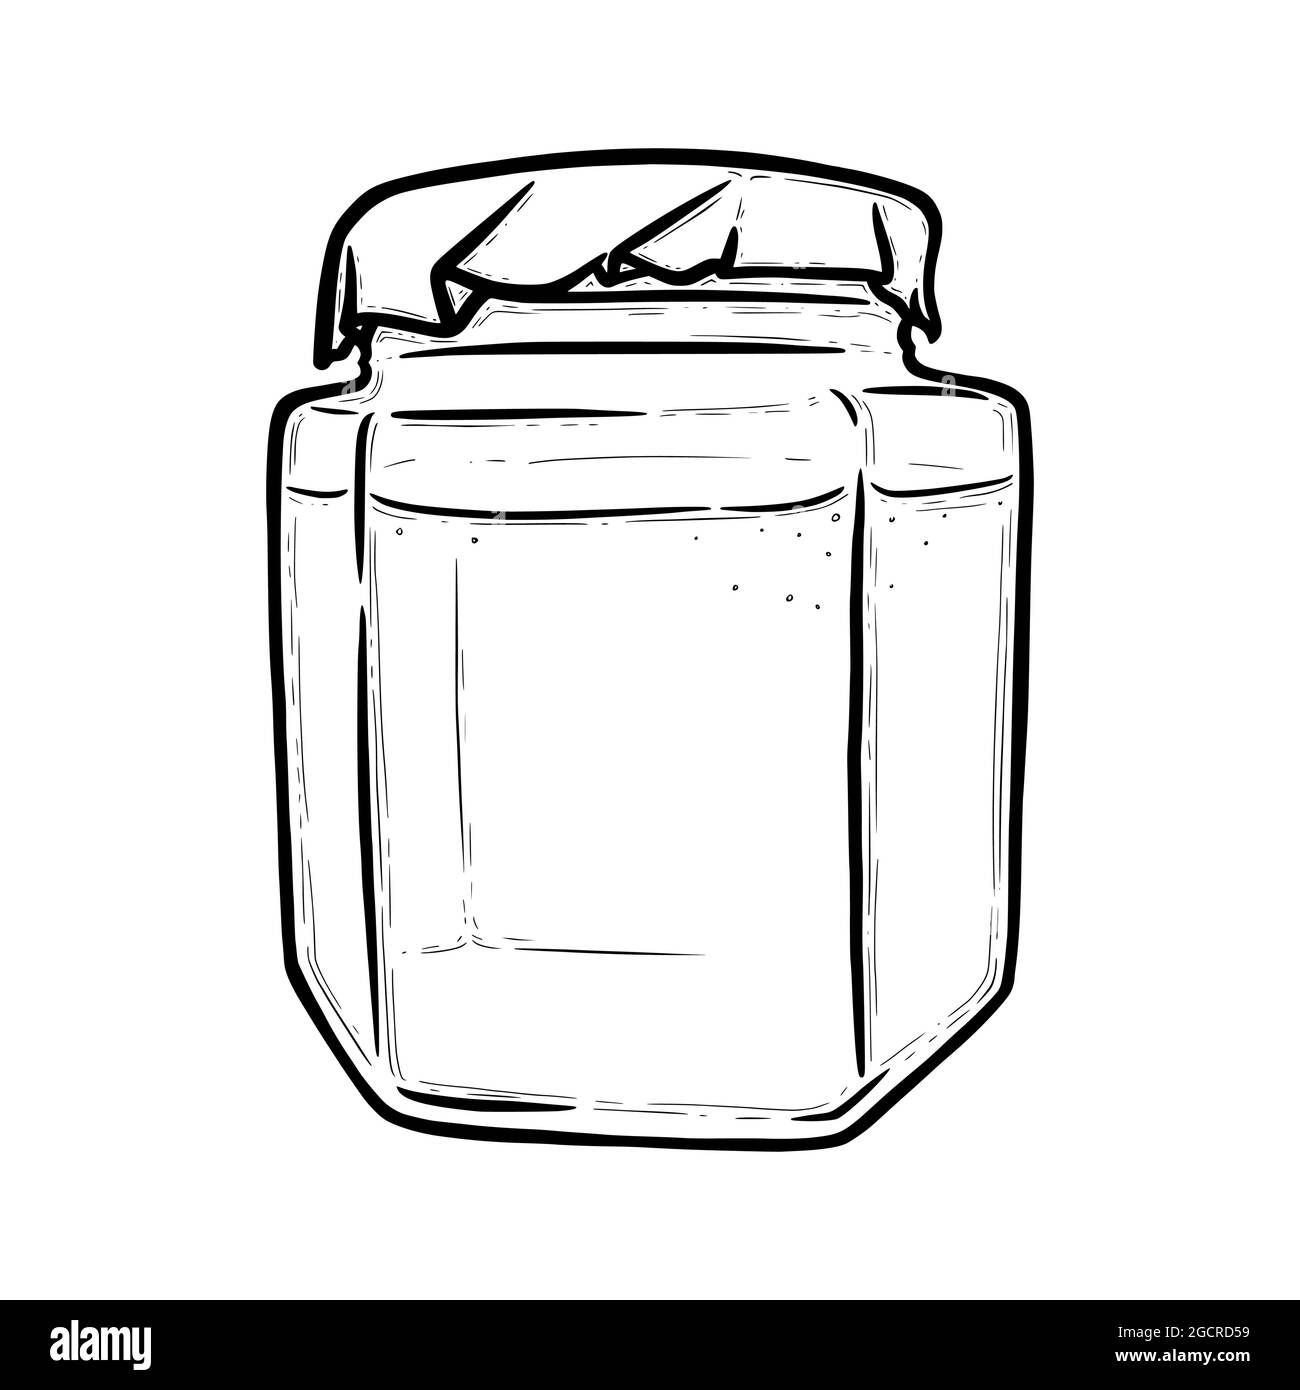 Glass jar front view. Hexagonal jar for preserves of pickles, honey or jam. Hand drawn vector illustration isolated in white background Stock Vector